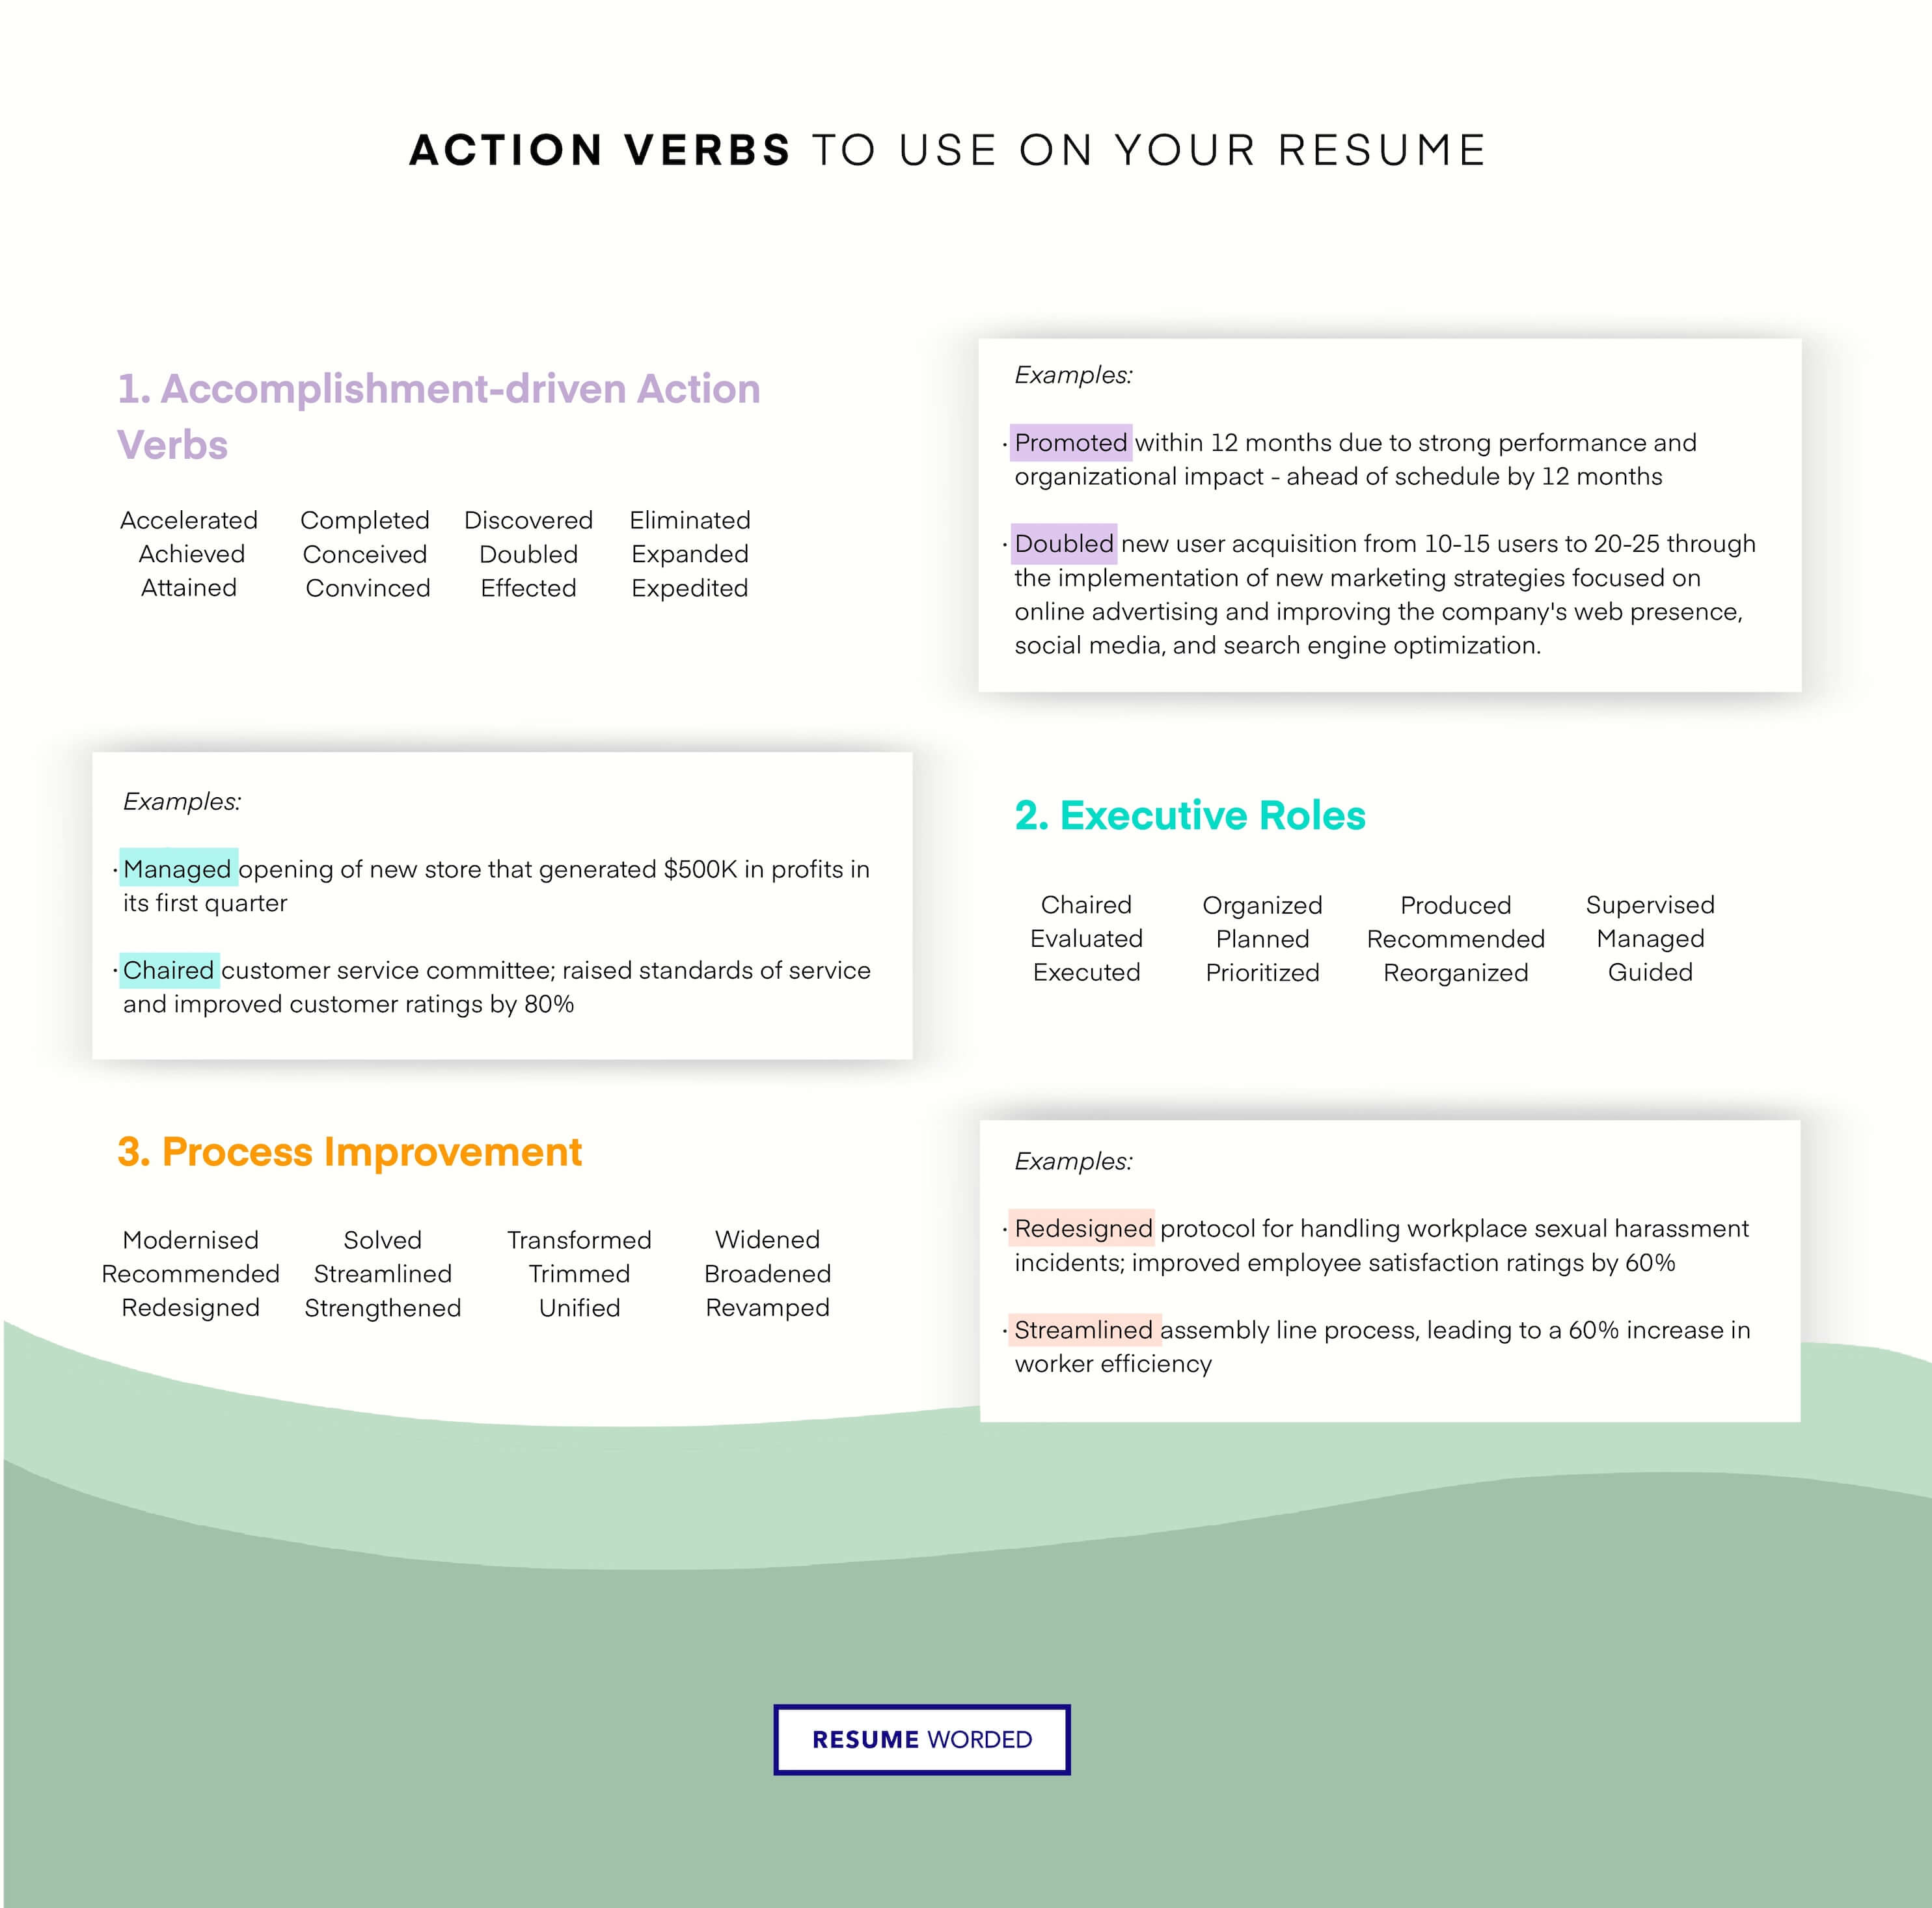 Use action verbs to show your experience with multiple tasks. - Certified Pharmacy Technician Resume